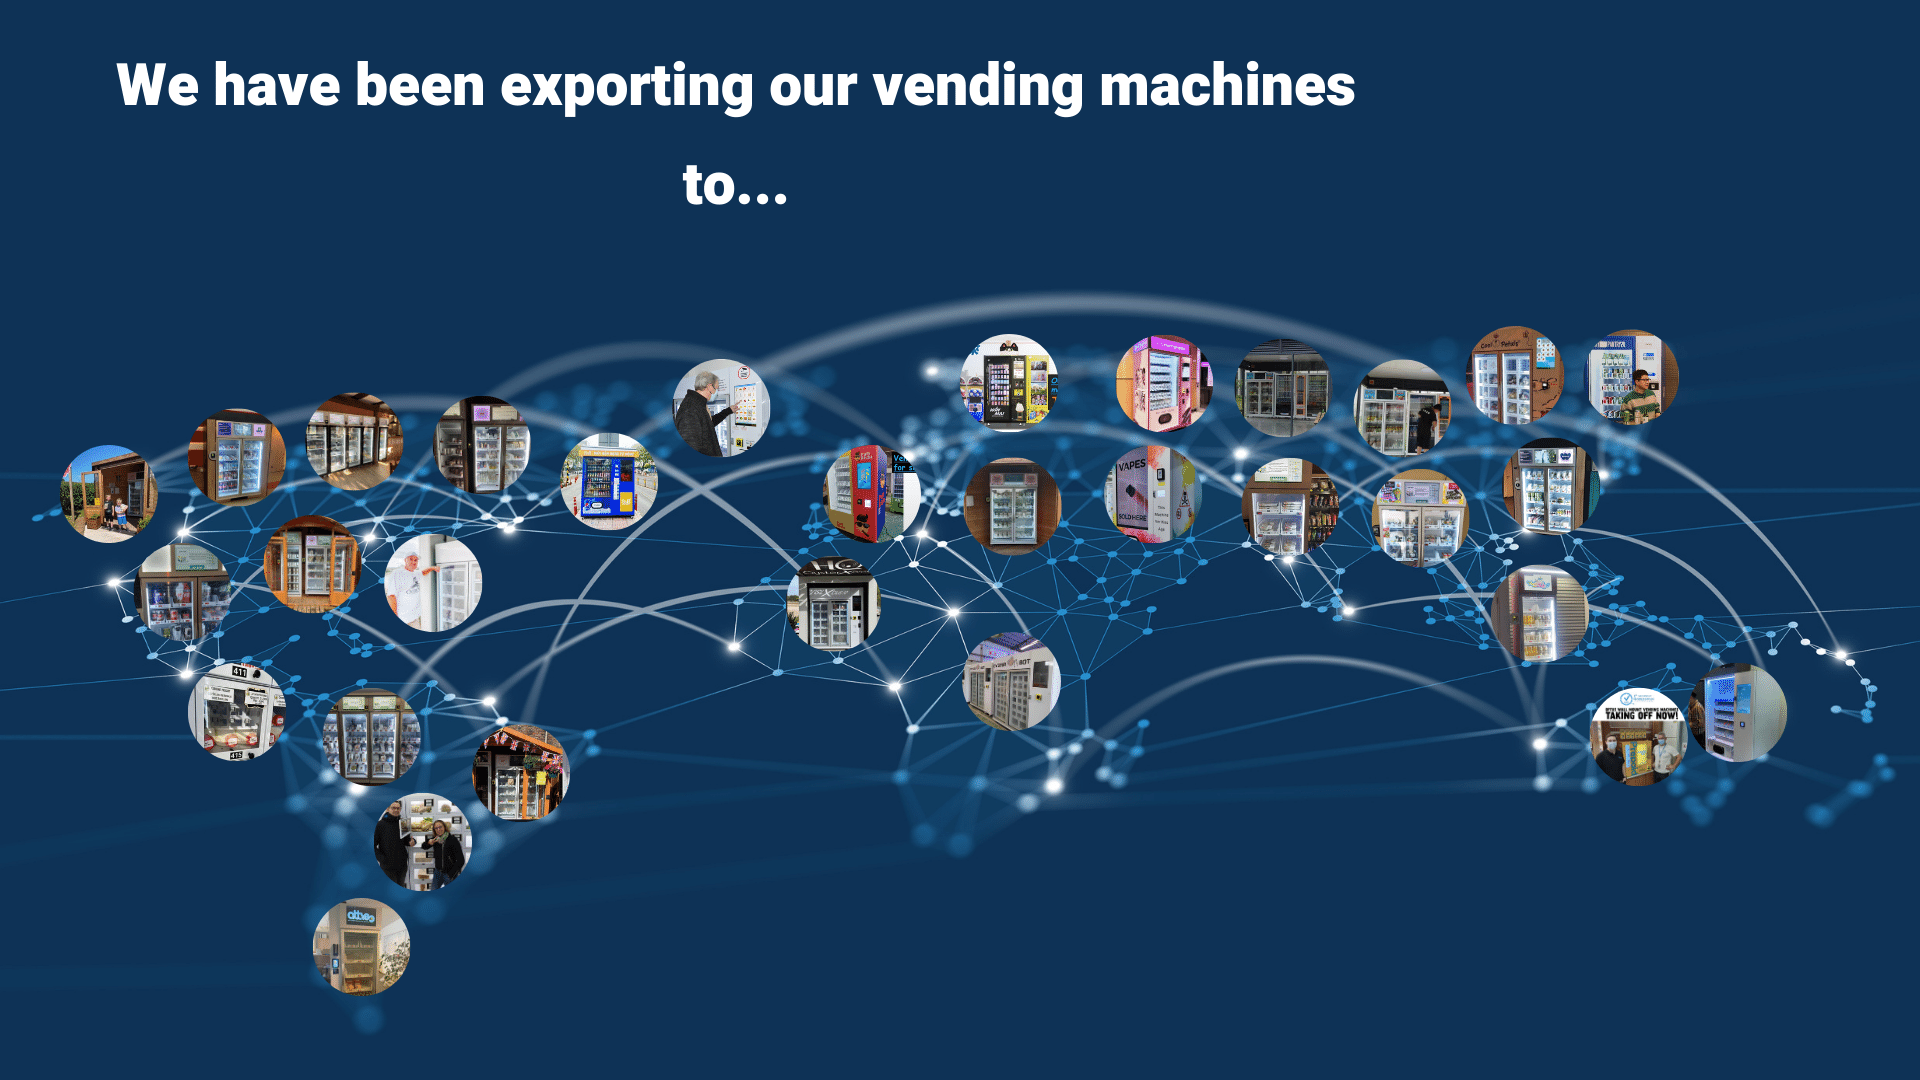 Chinese vending machine have been exported to